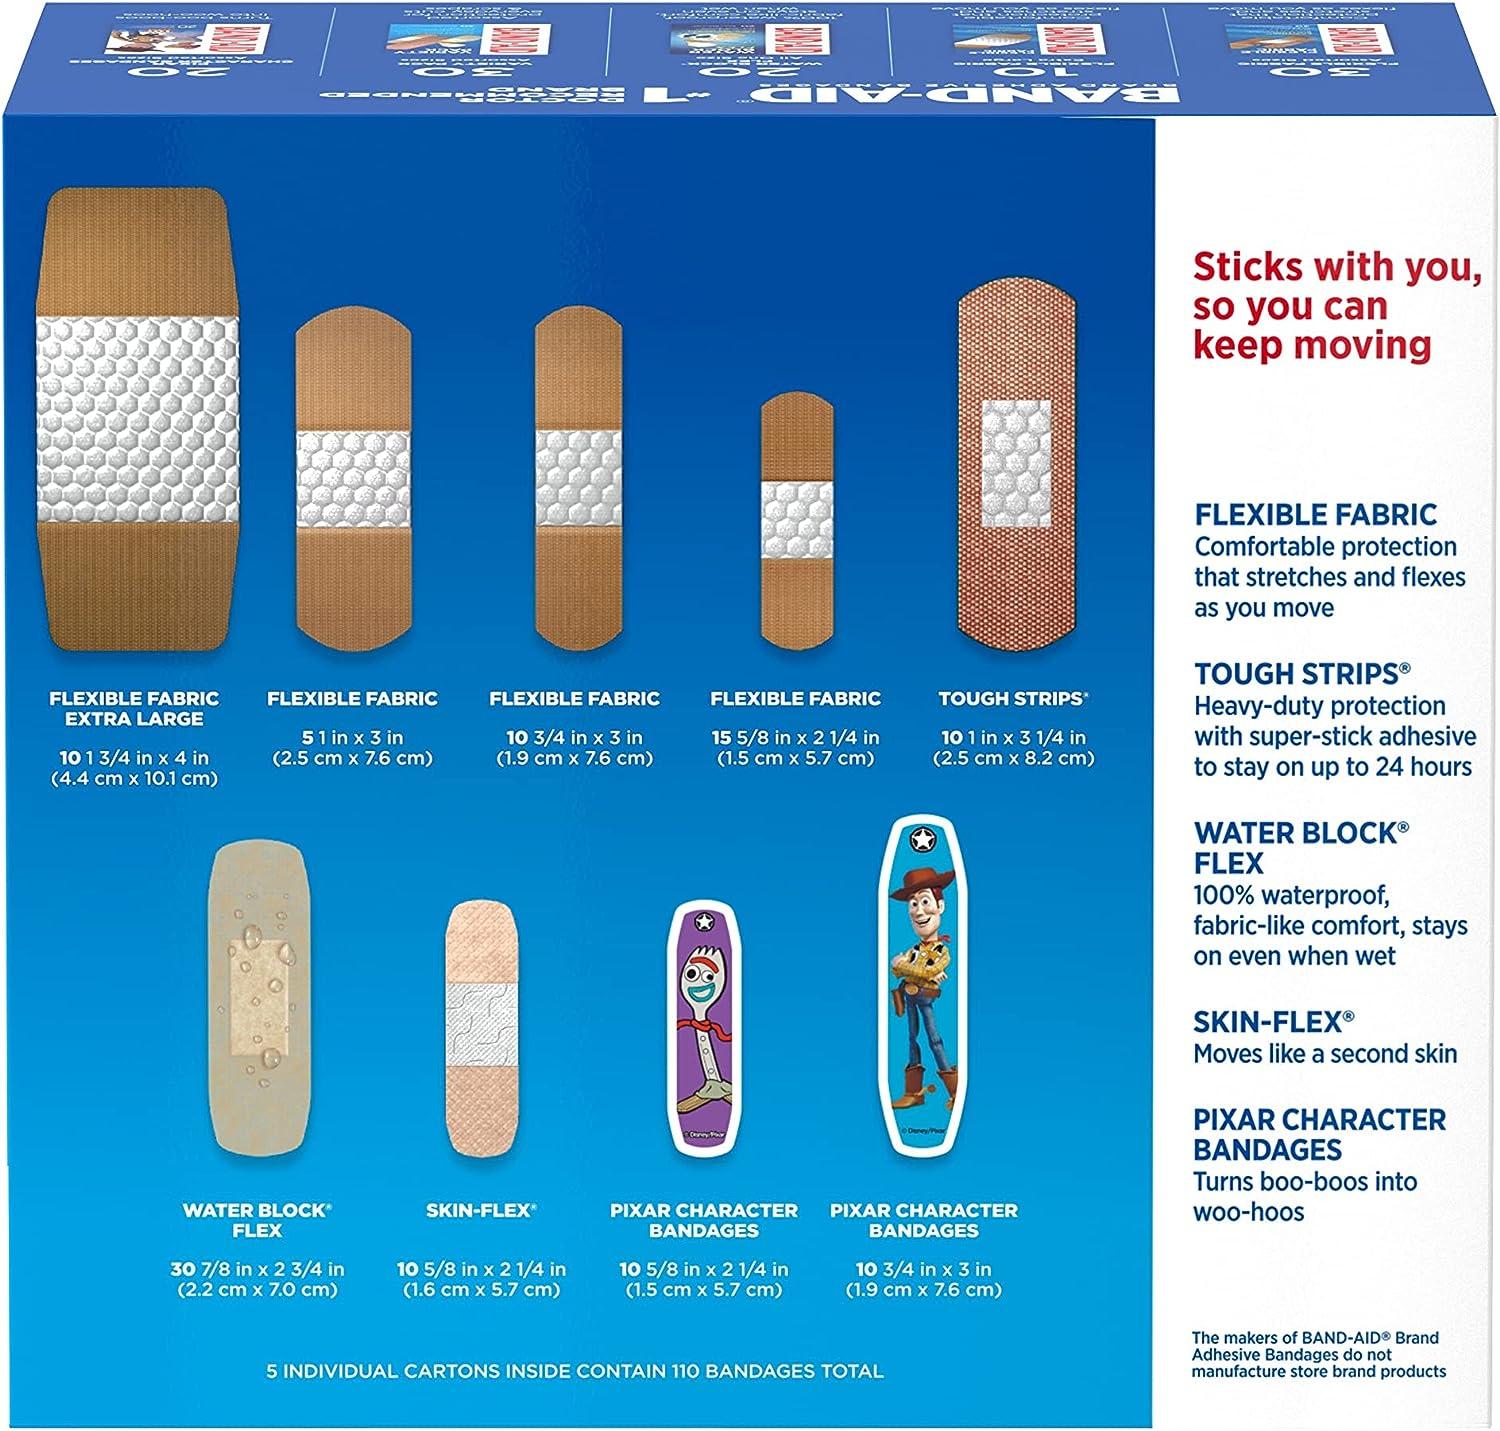 Band-Aid Brand Adhesive Bandages, Flexible Fabric, 30 Count, 1.9 cm x 7.6  cm Pack of 2 